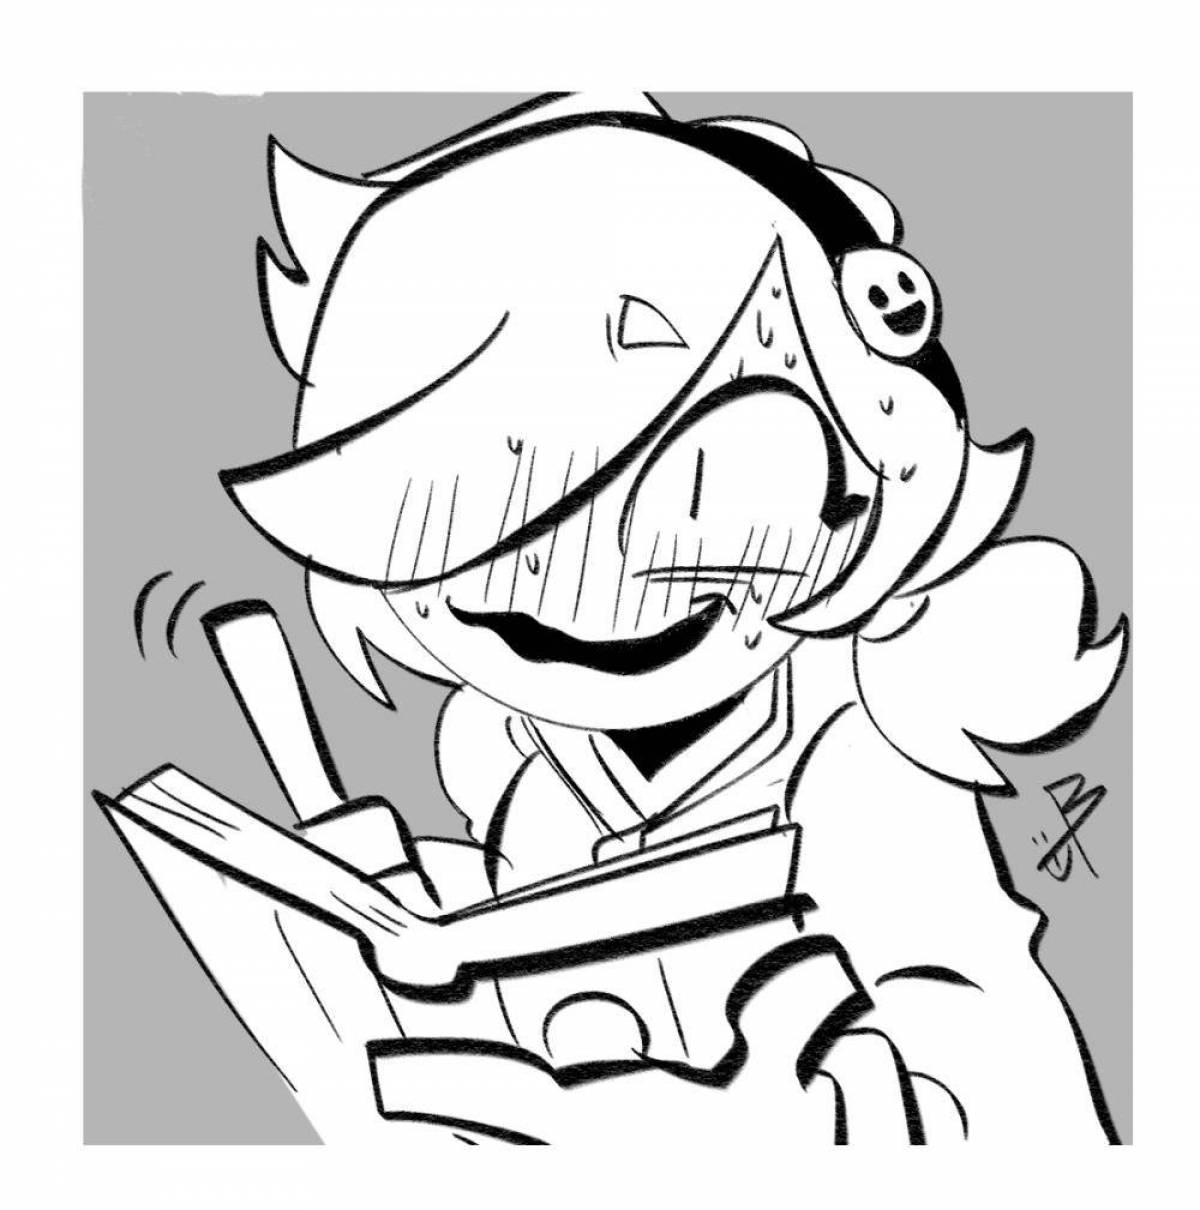 Colette from brawl stars #7